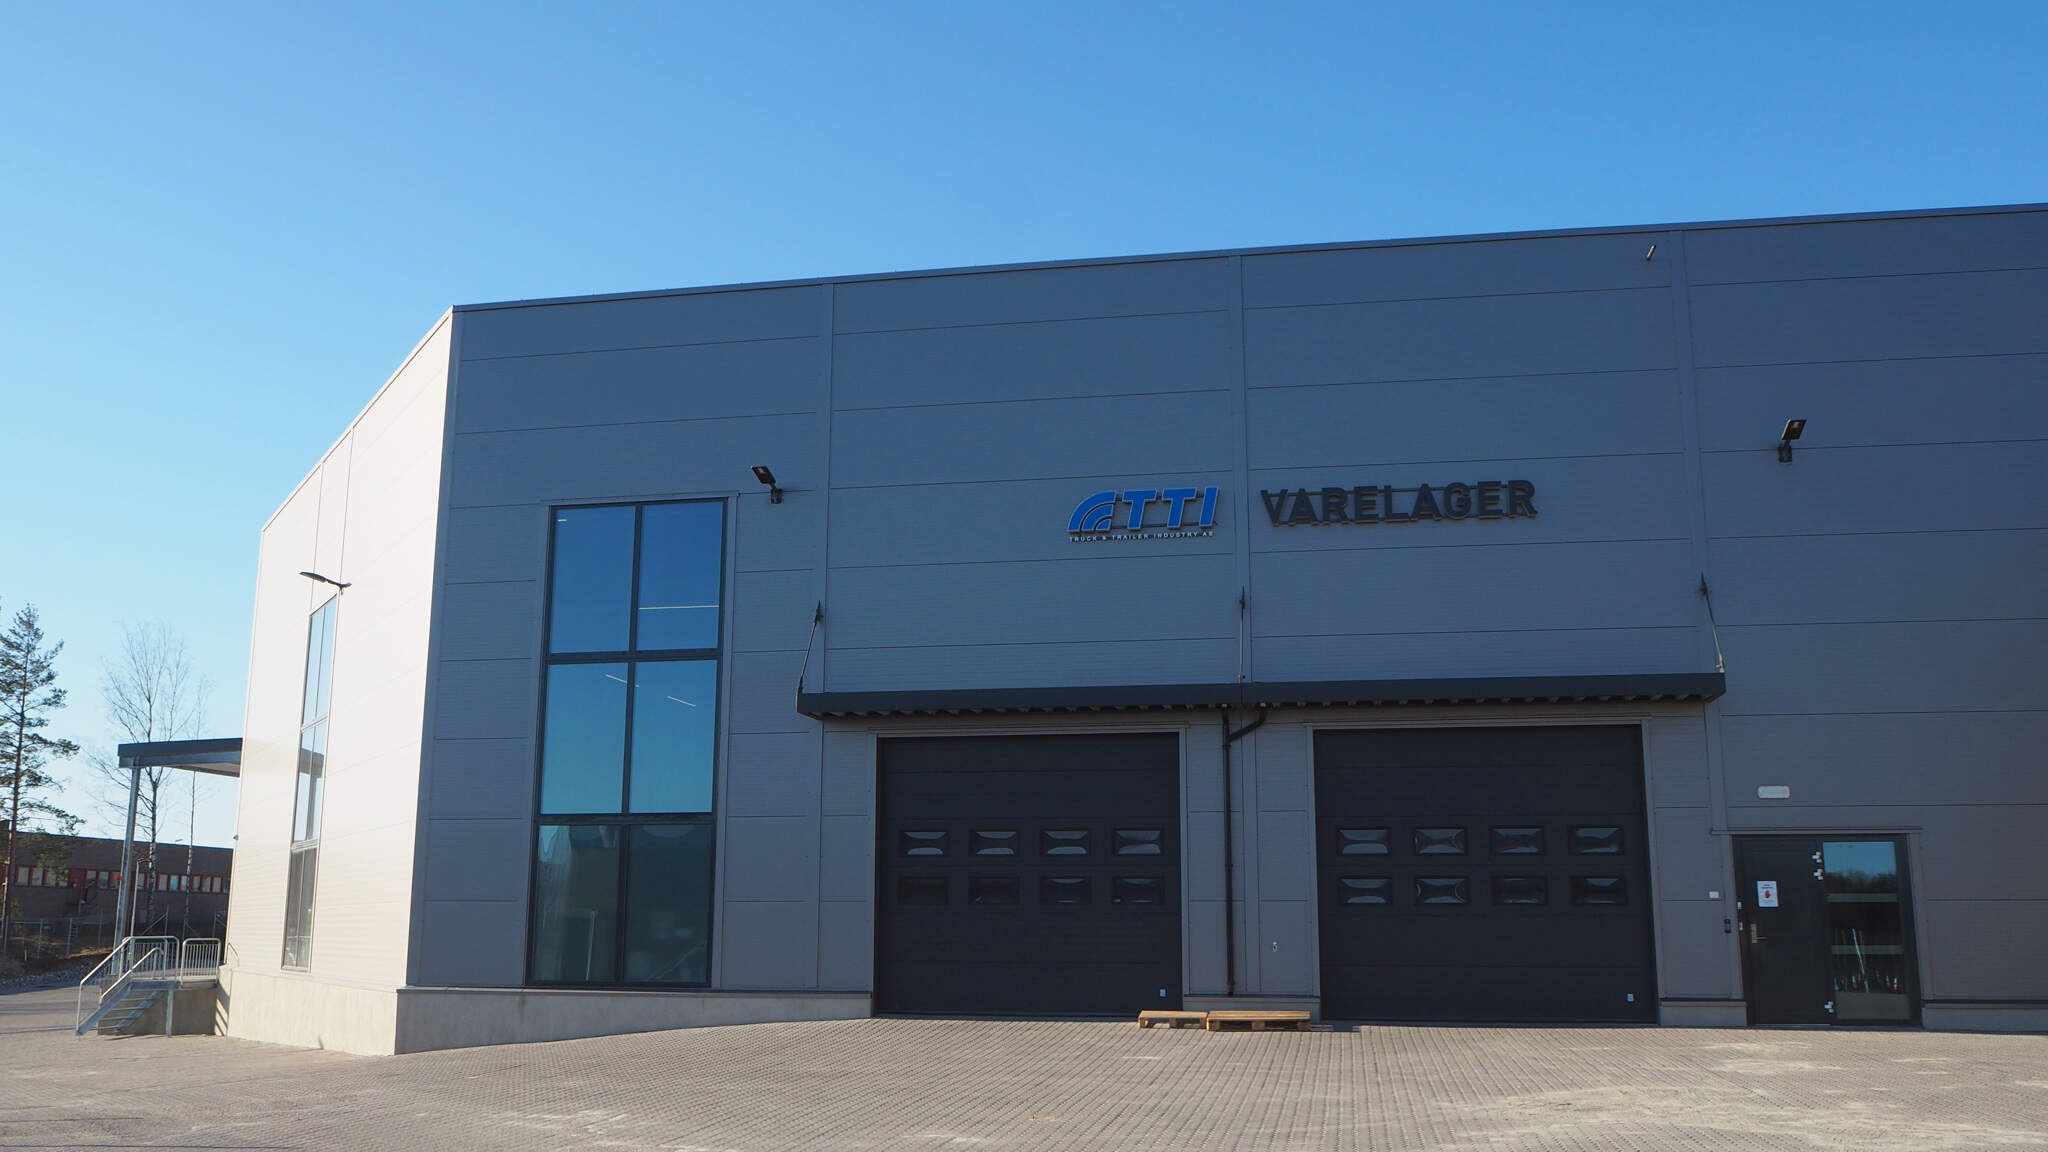 TTI turns to DACHSER for sourcing spare parts from all across Europe to Norway.